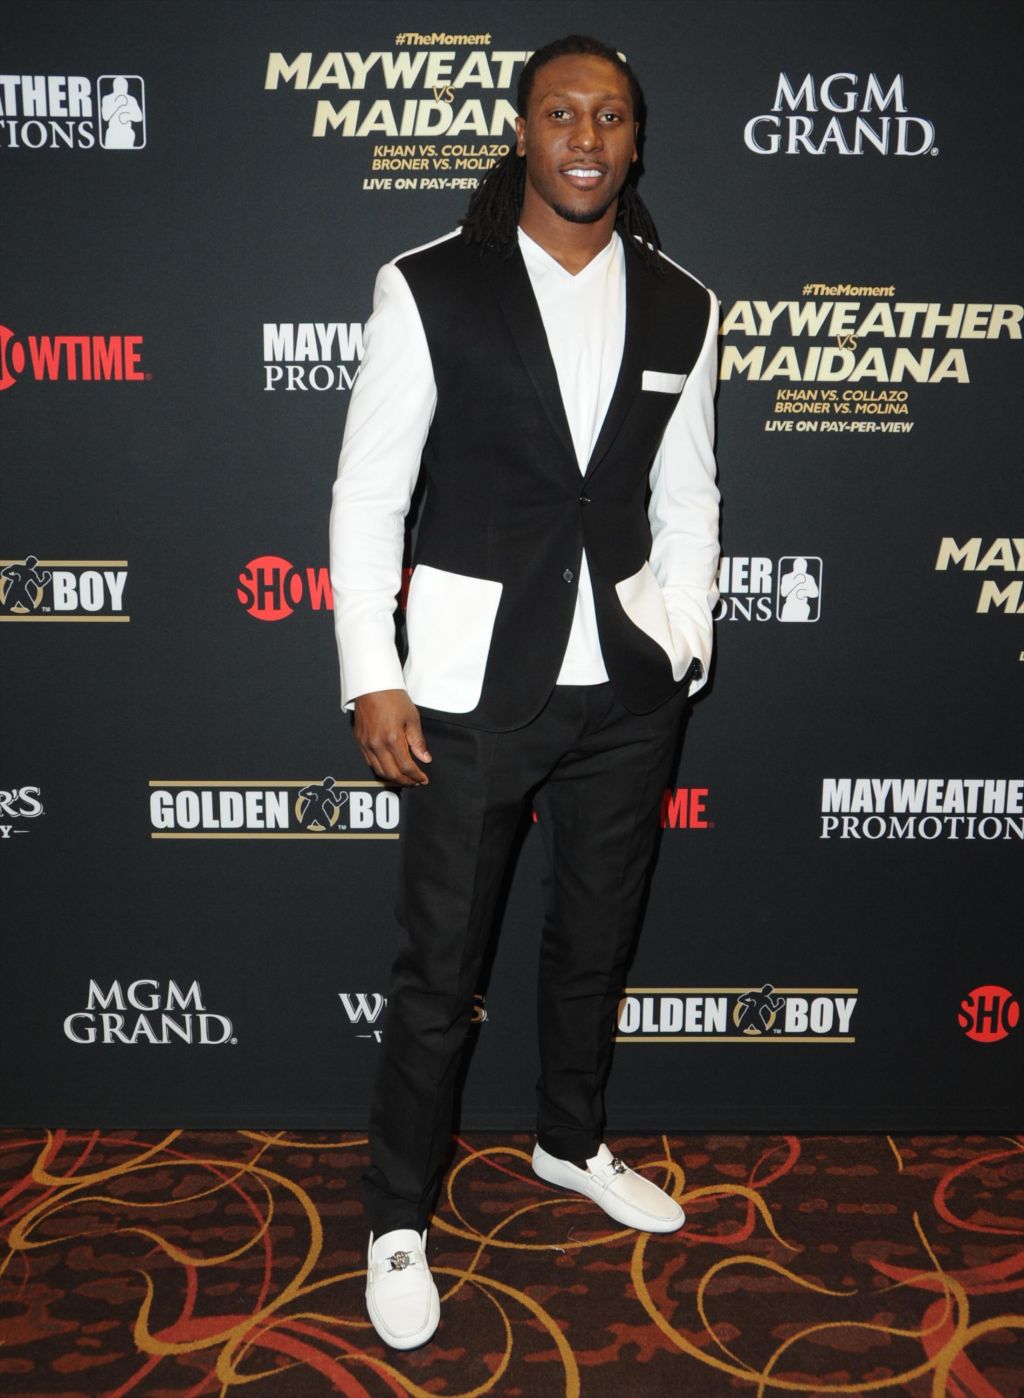 Mayweather Vs. Maidana Pre-Fight Party Presented By Showtime